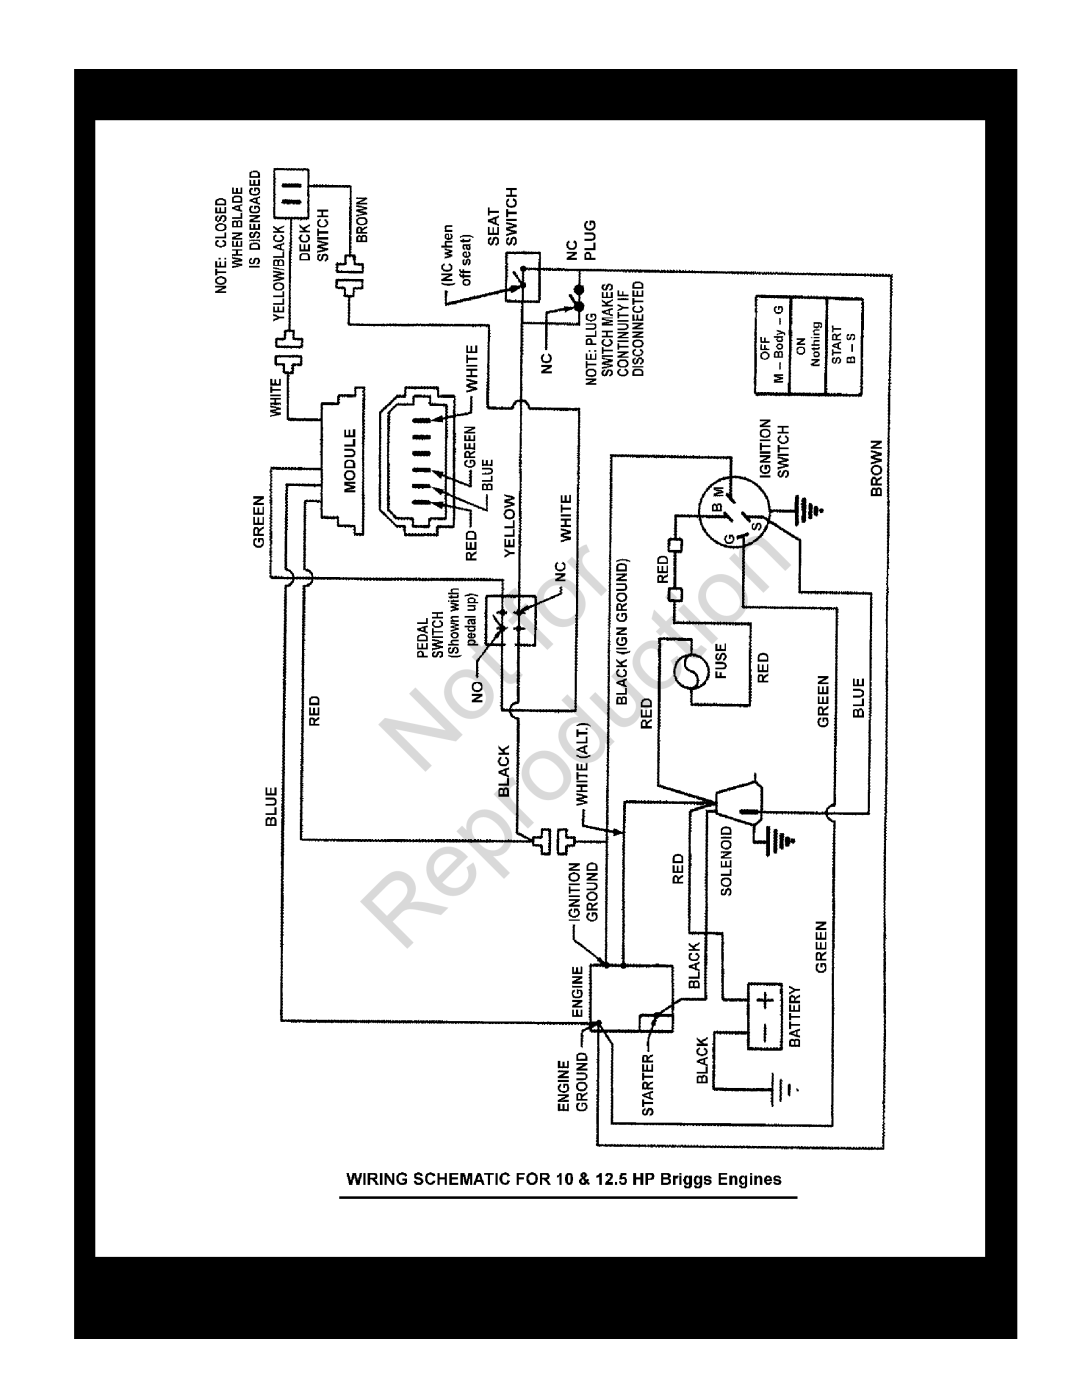 Snapper 85623, 84941 manual Wiring Schematic 10, 11 & 12.5HP Briggs, Reproduction, Manual No, 7006278, Standard Deck, Series 